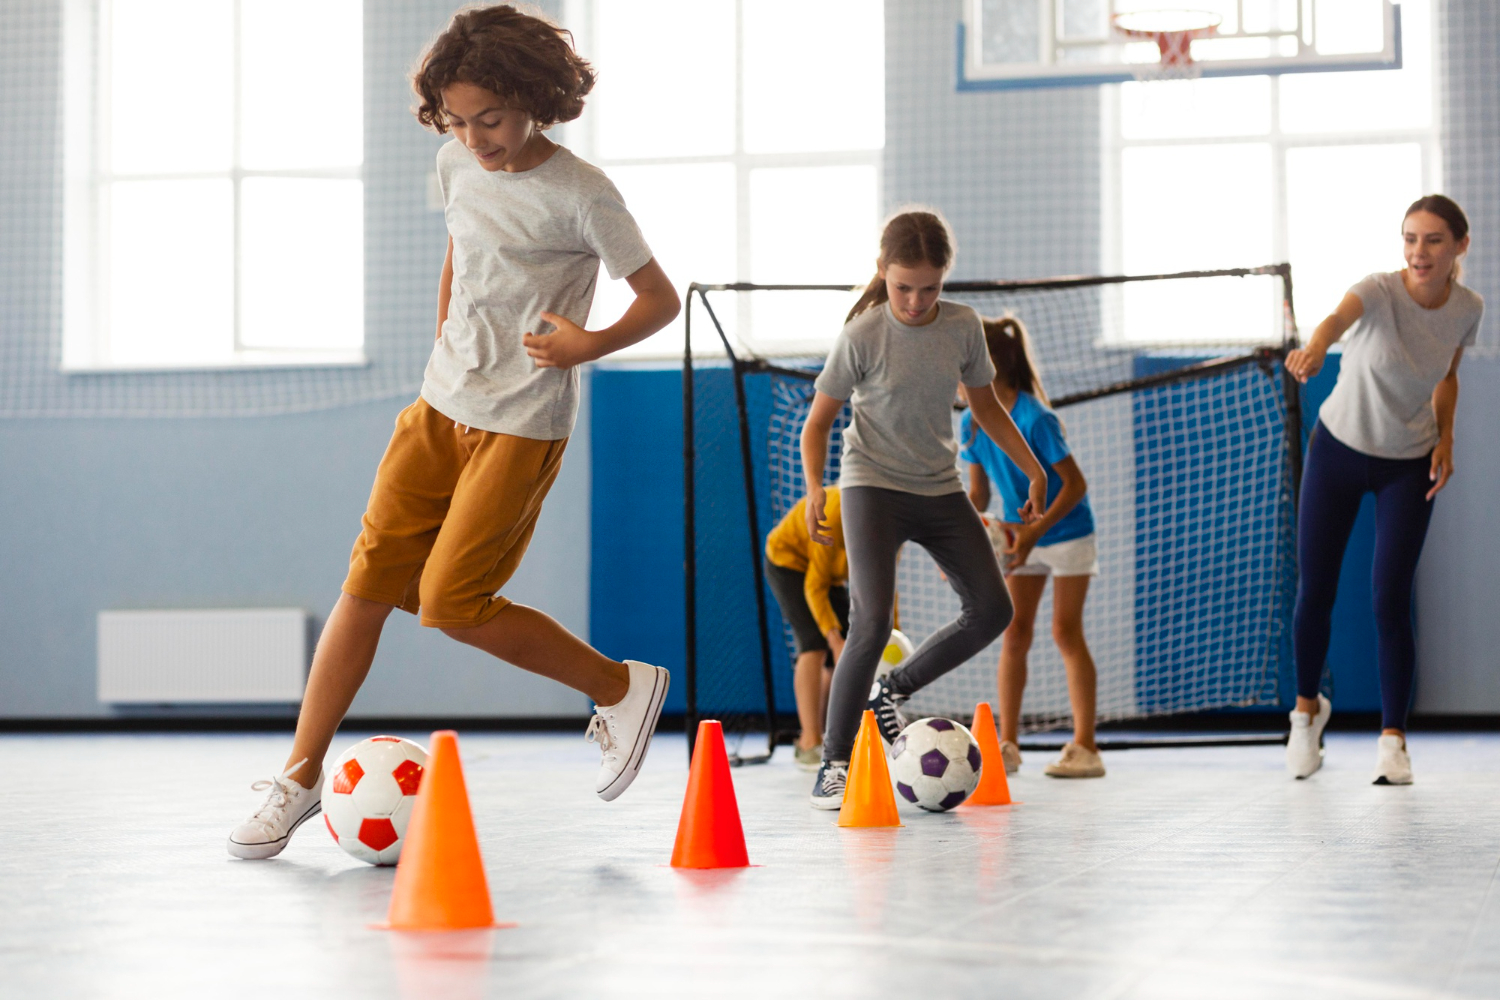 Physical activities promote gross motor skills and exploration of the environment.